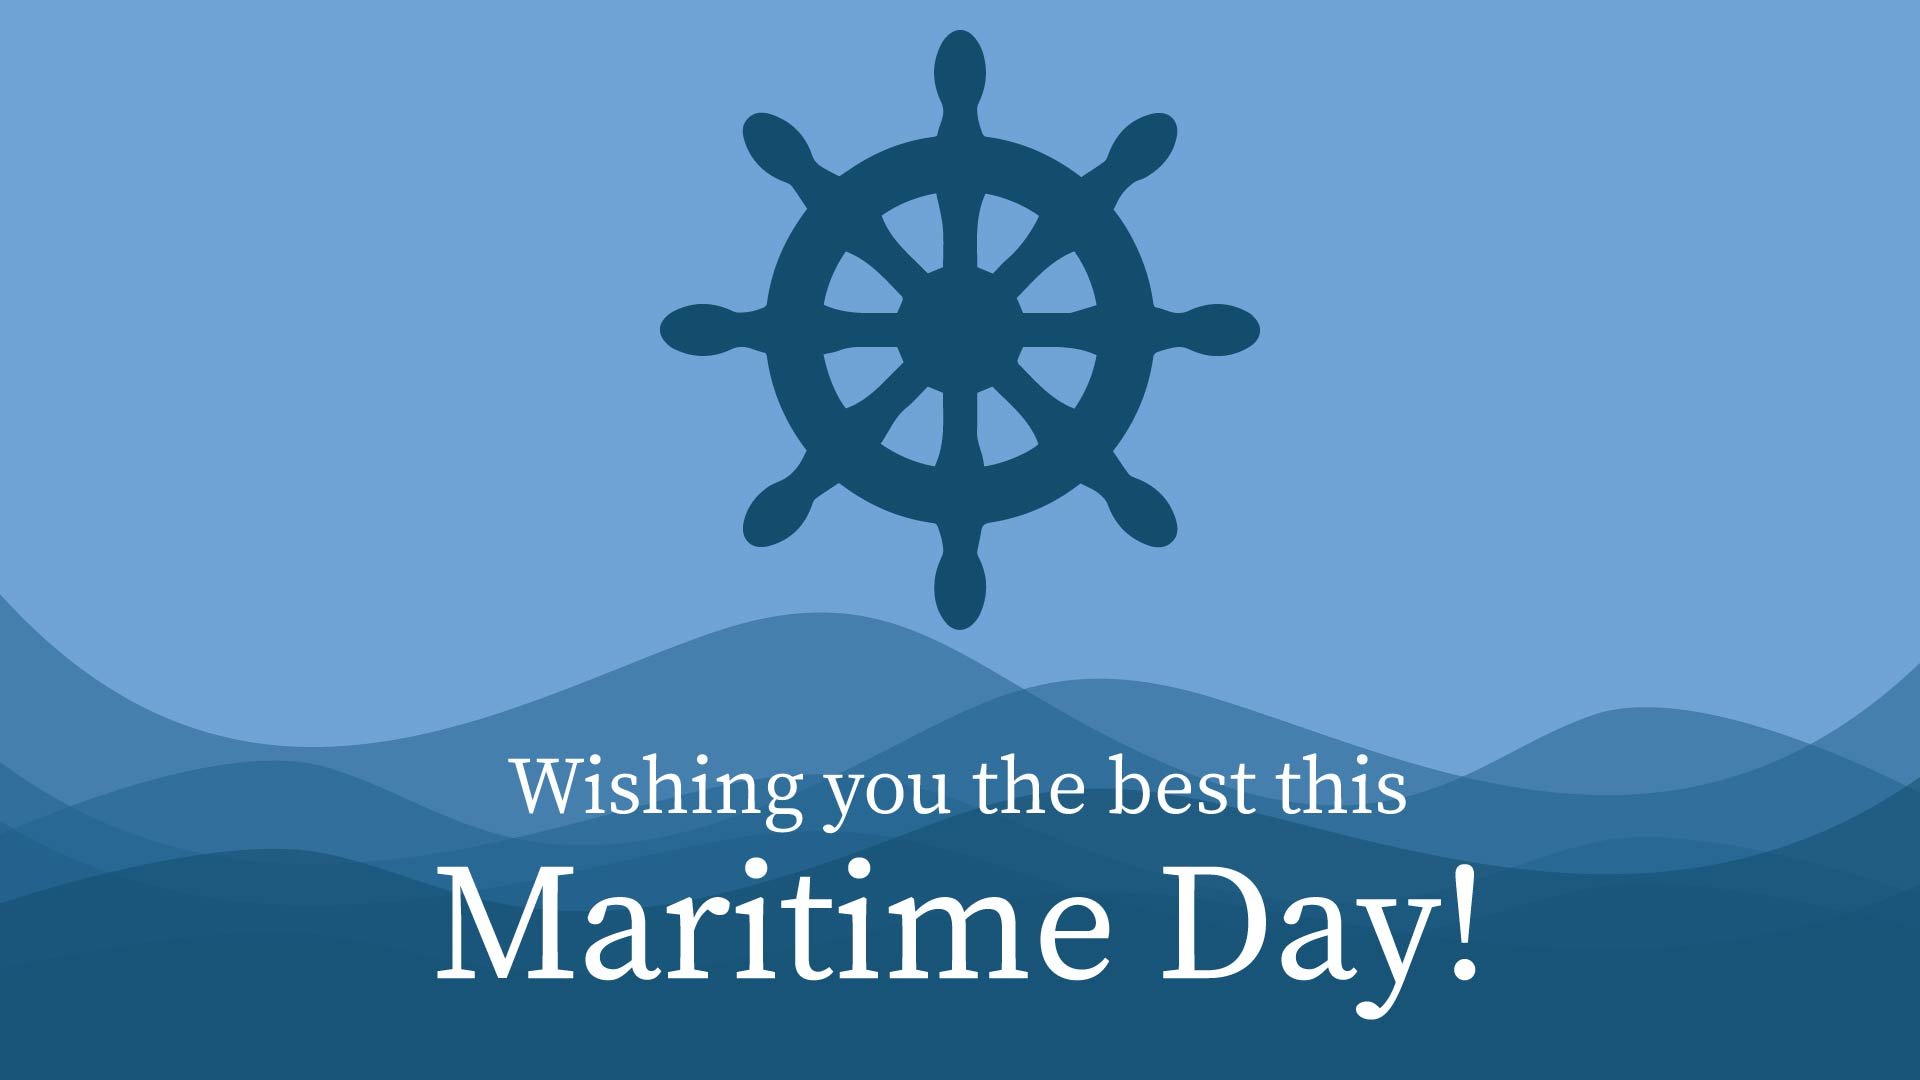 Free National Maritime Day Wishes Background in PDF, Illustrator, PSD, EPS, SVG, JPG, PNG